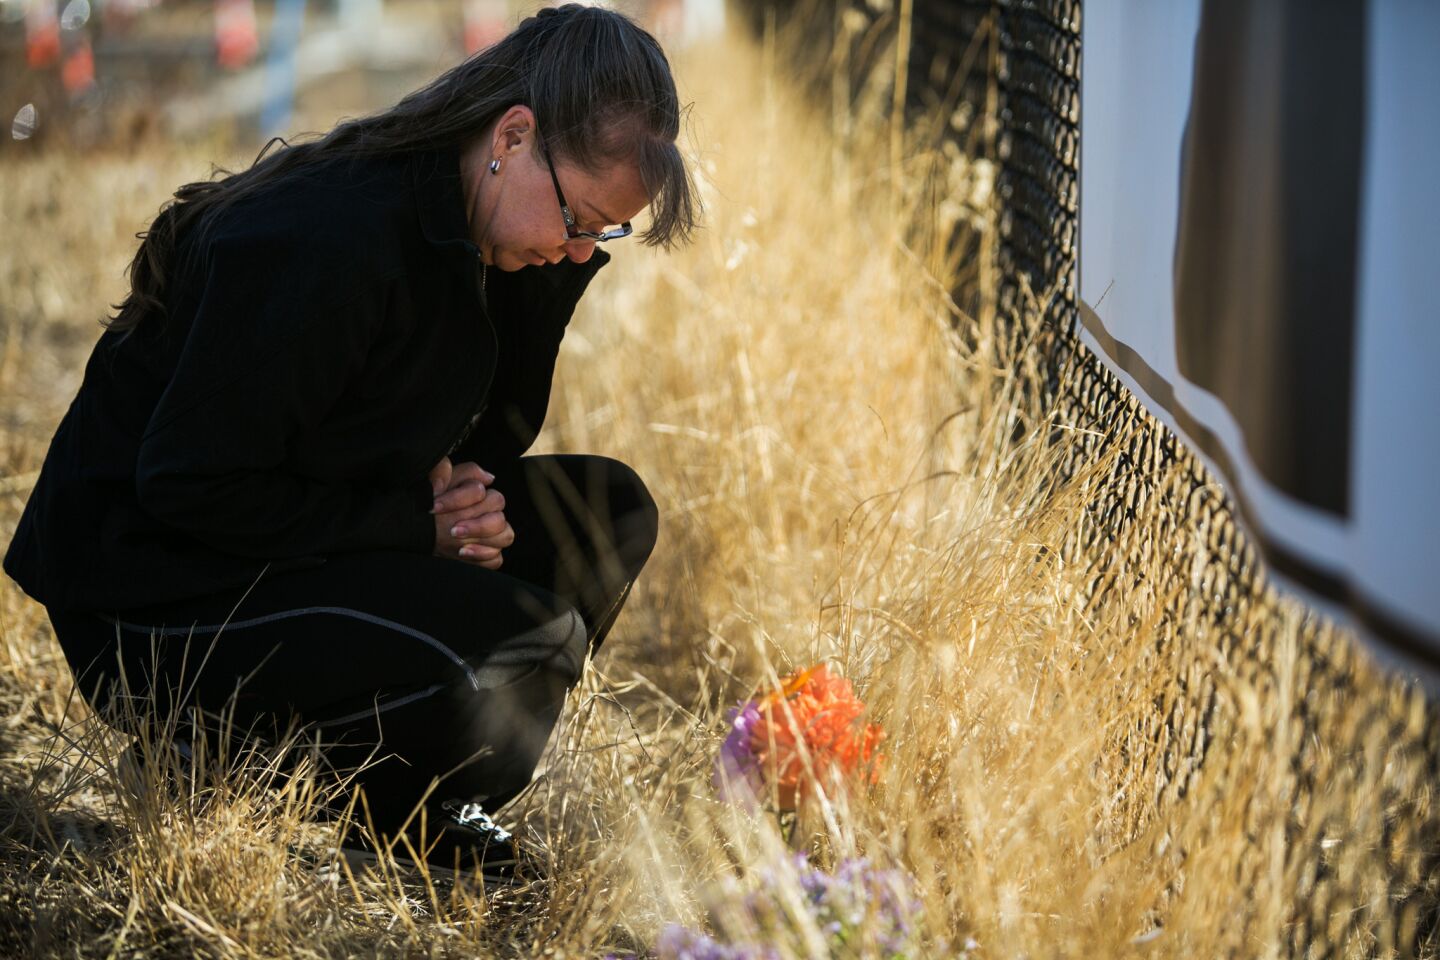 Robin Griffith of Portland pays her respects to the victims Saturday while in Roseburg.